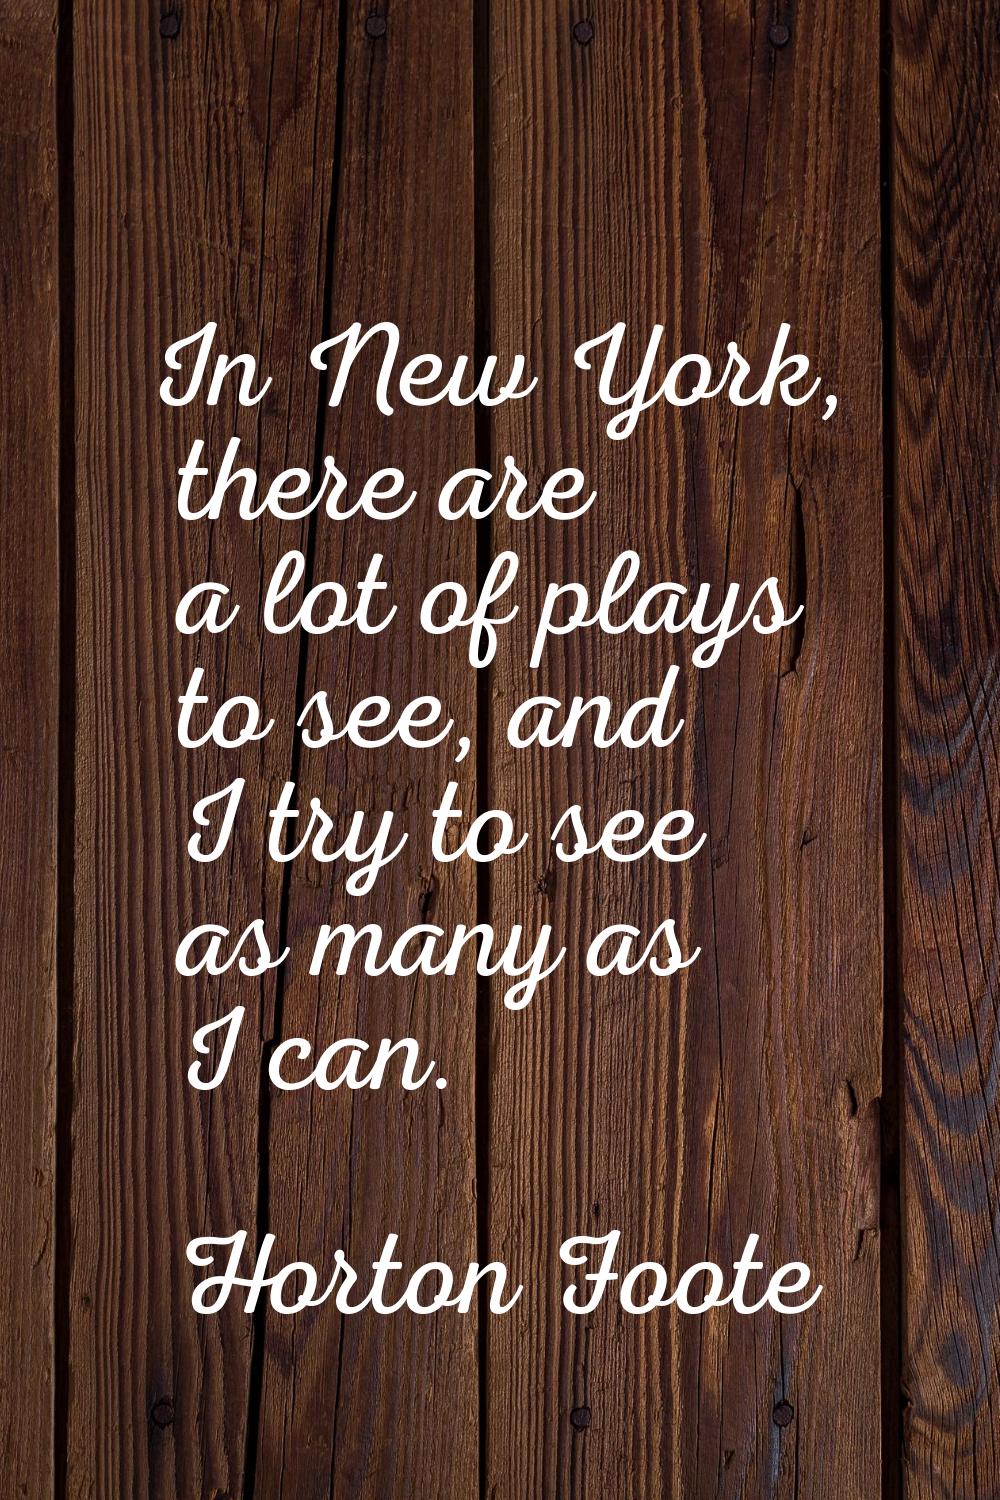 In New York, there are a lot of plays to see, and I try to see as many as I can.